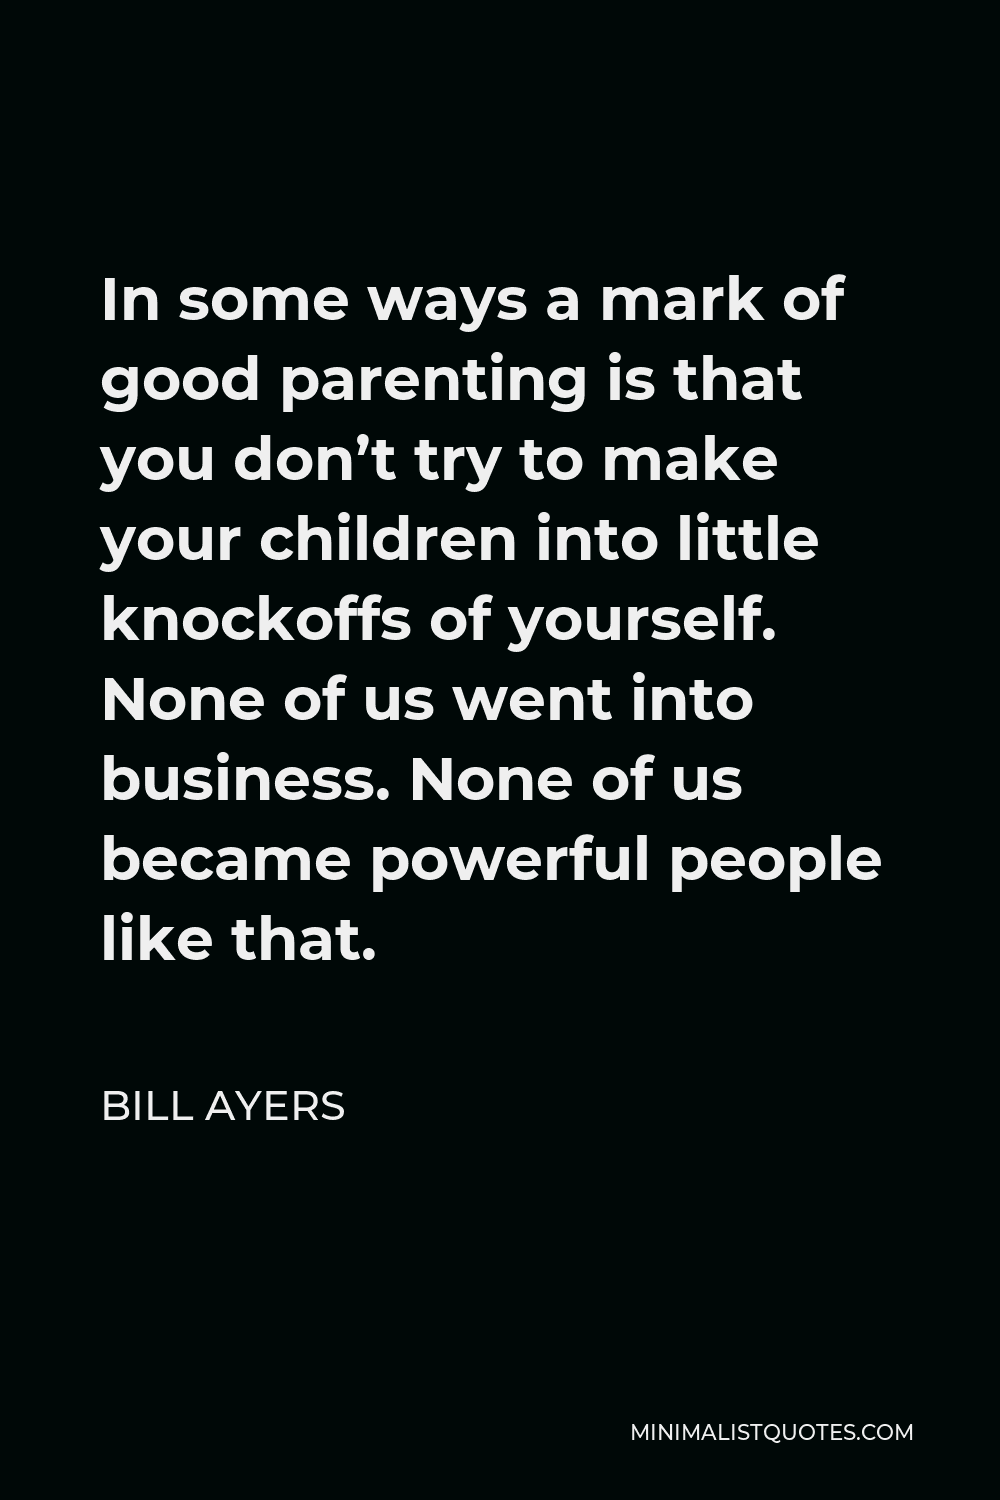 Bill Ayers Quote - In some ways a mark of good parenting is that you don’t try to make your children into little knockoffs of yourself. None of us went into business. None of us became powerful people like that.